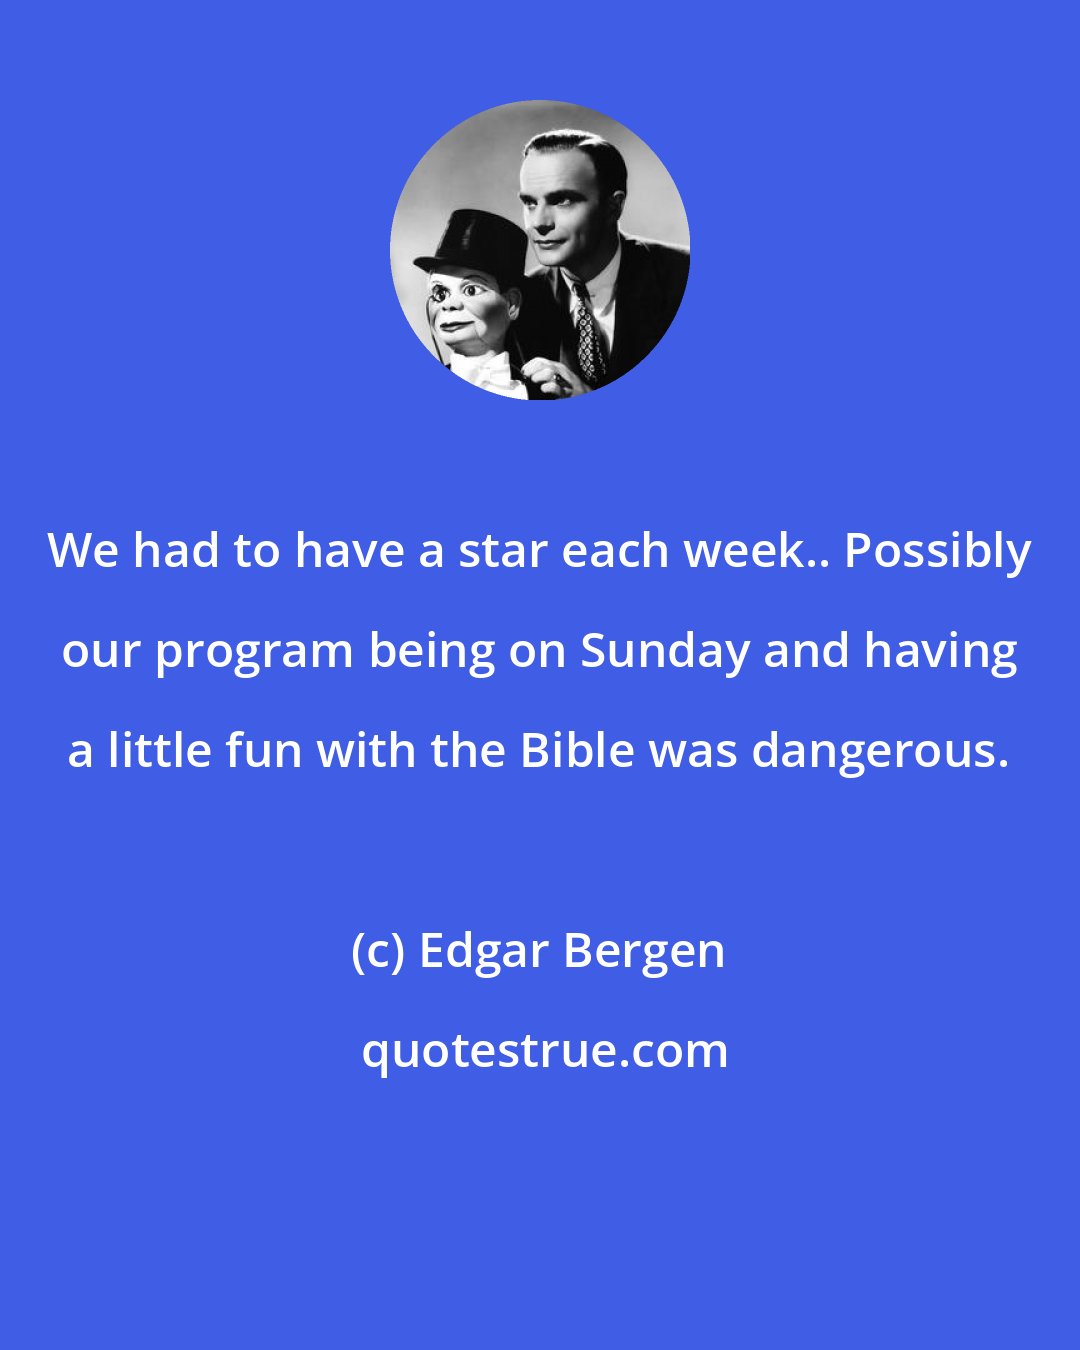 Edgar Bergen: We had to have a star each week.. Possibly our program being on Sunday and having a little fun with the Bible was dangerous.